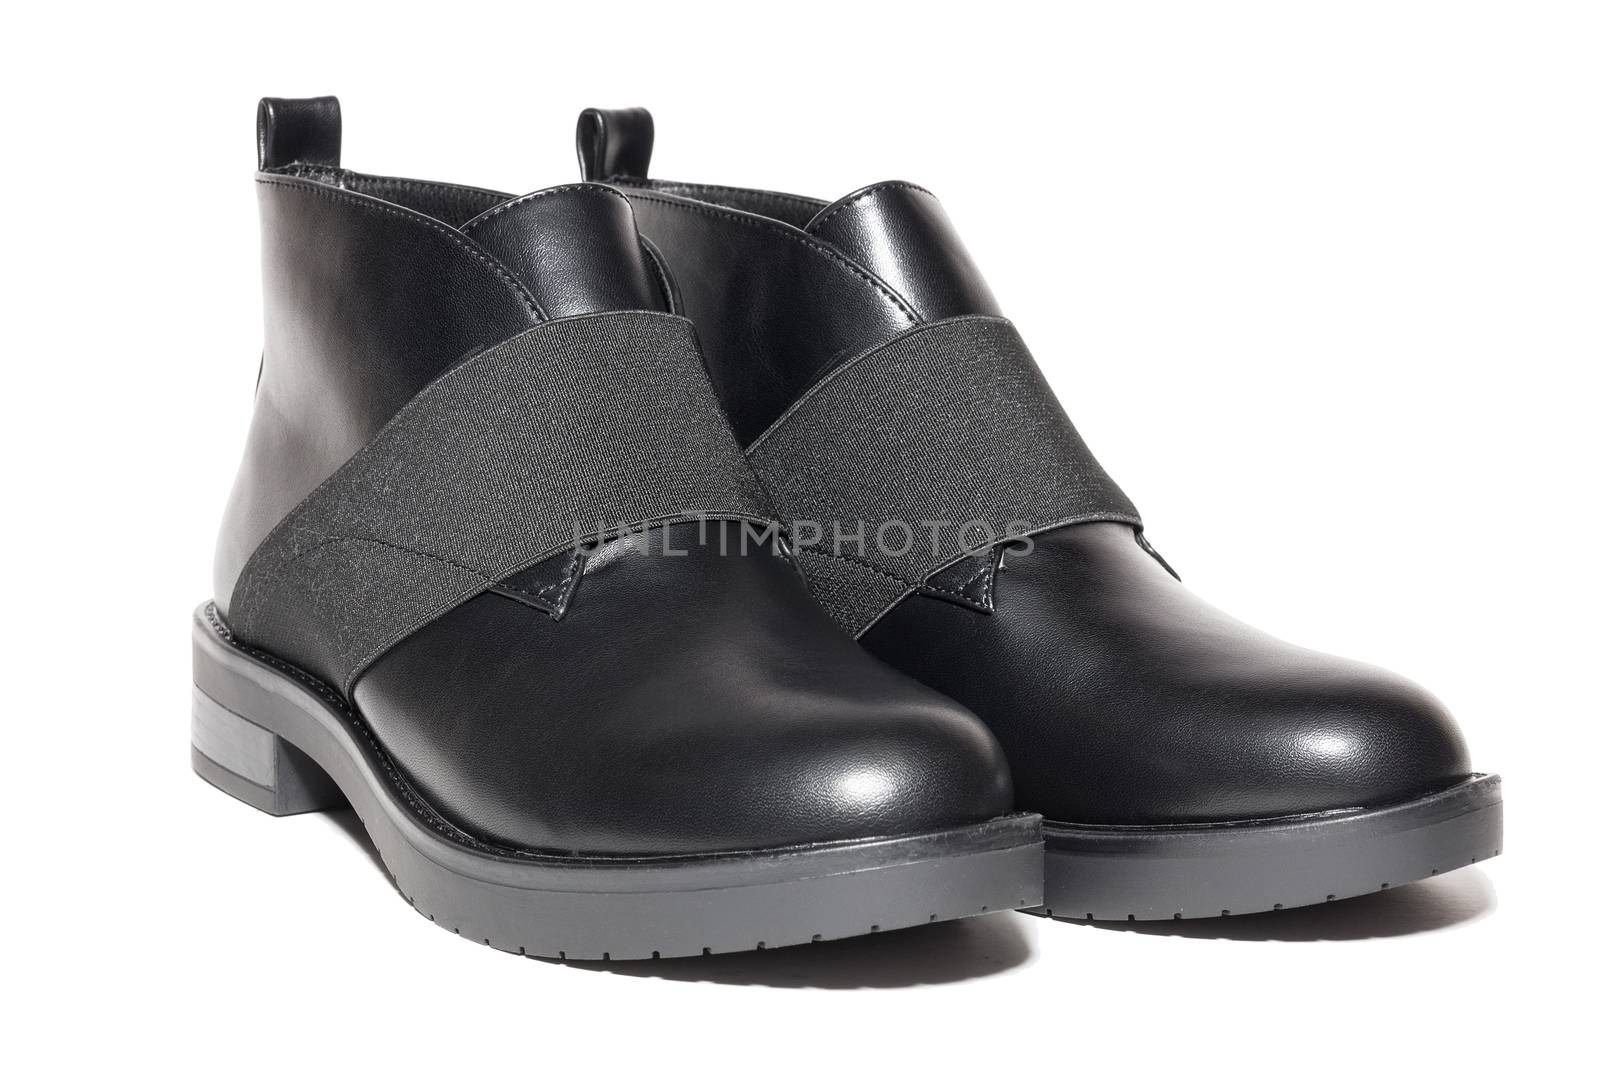 Female winter leather shoes on a white background, isolated, studio